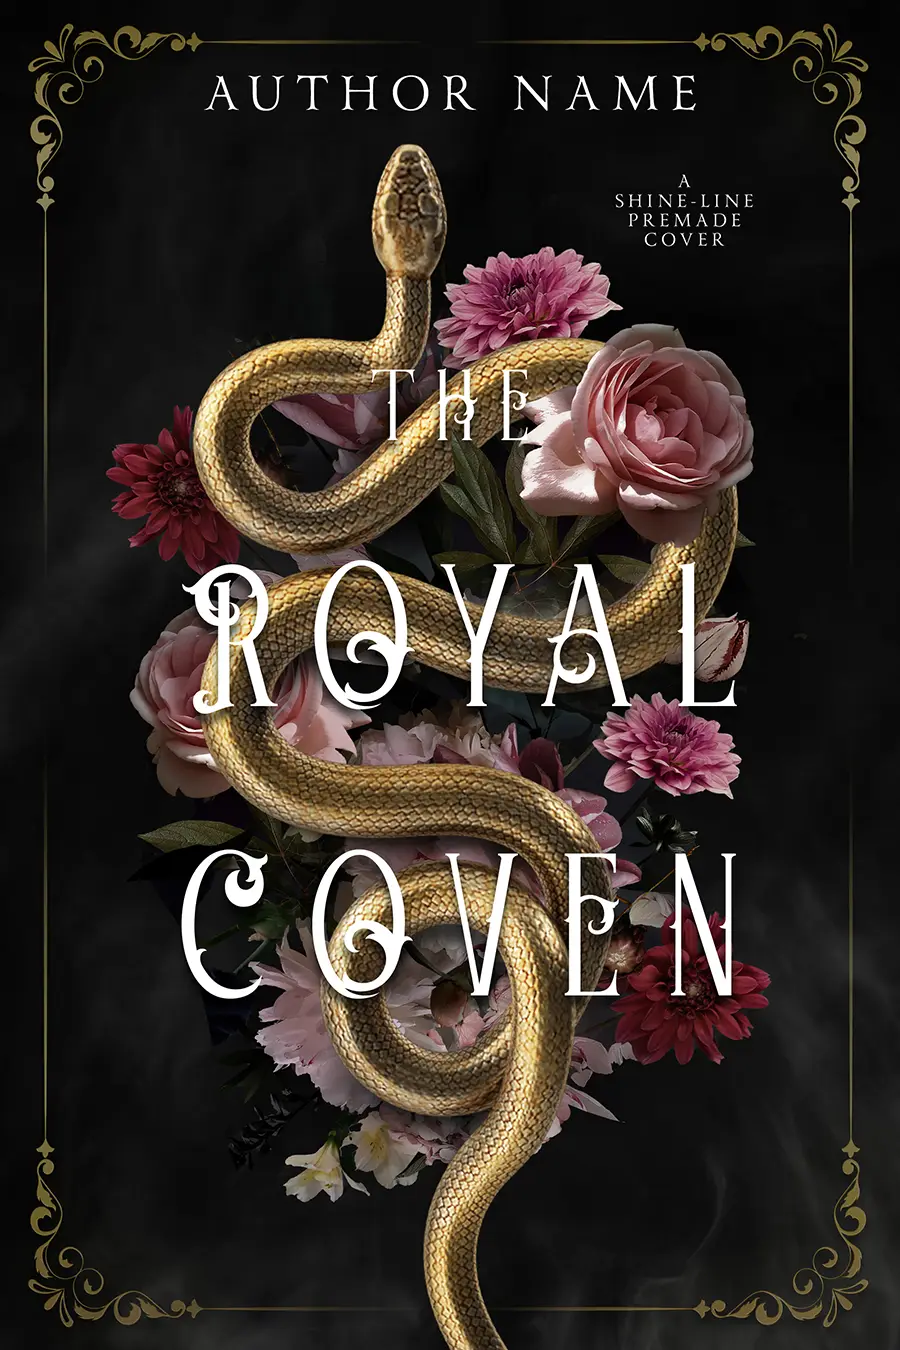 The Royal Coven